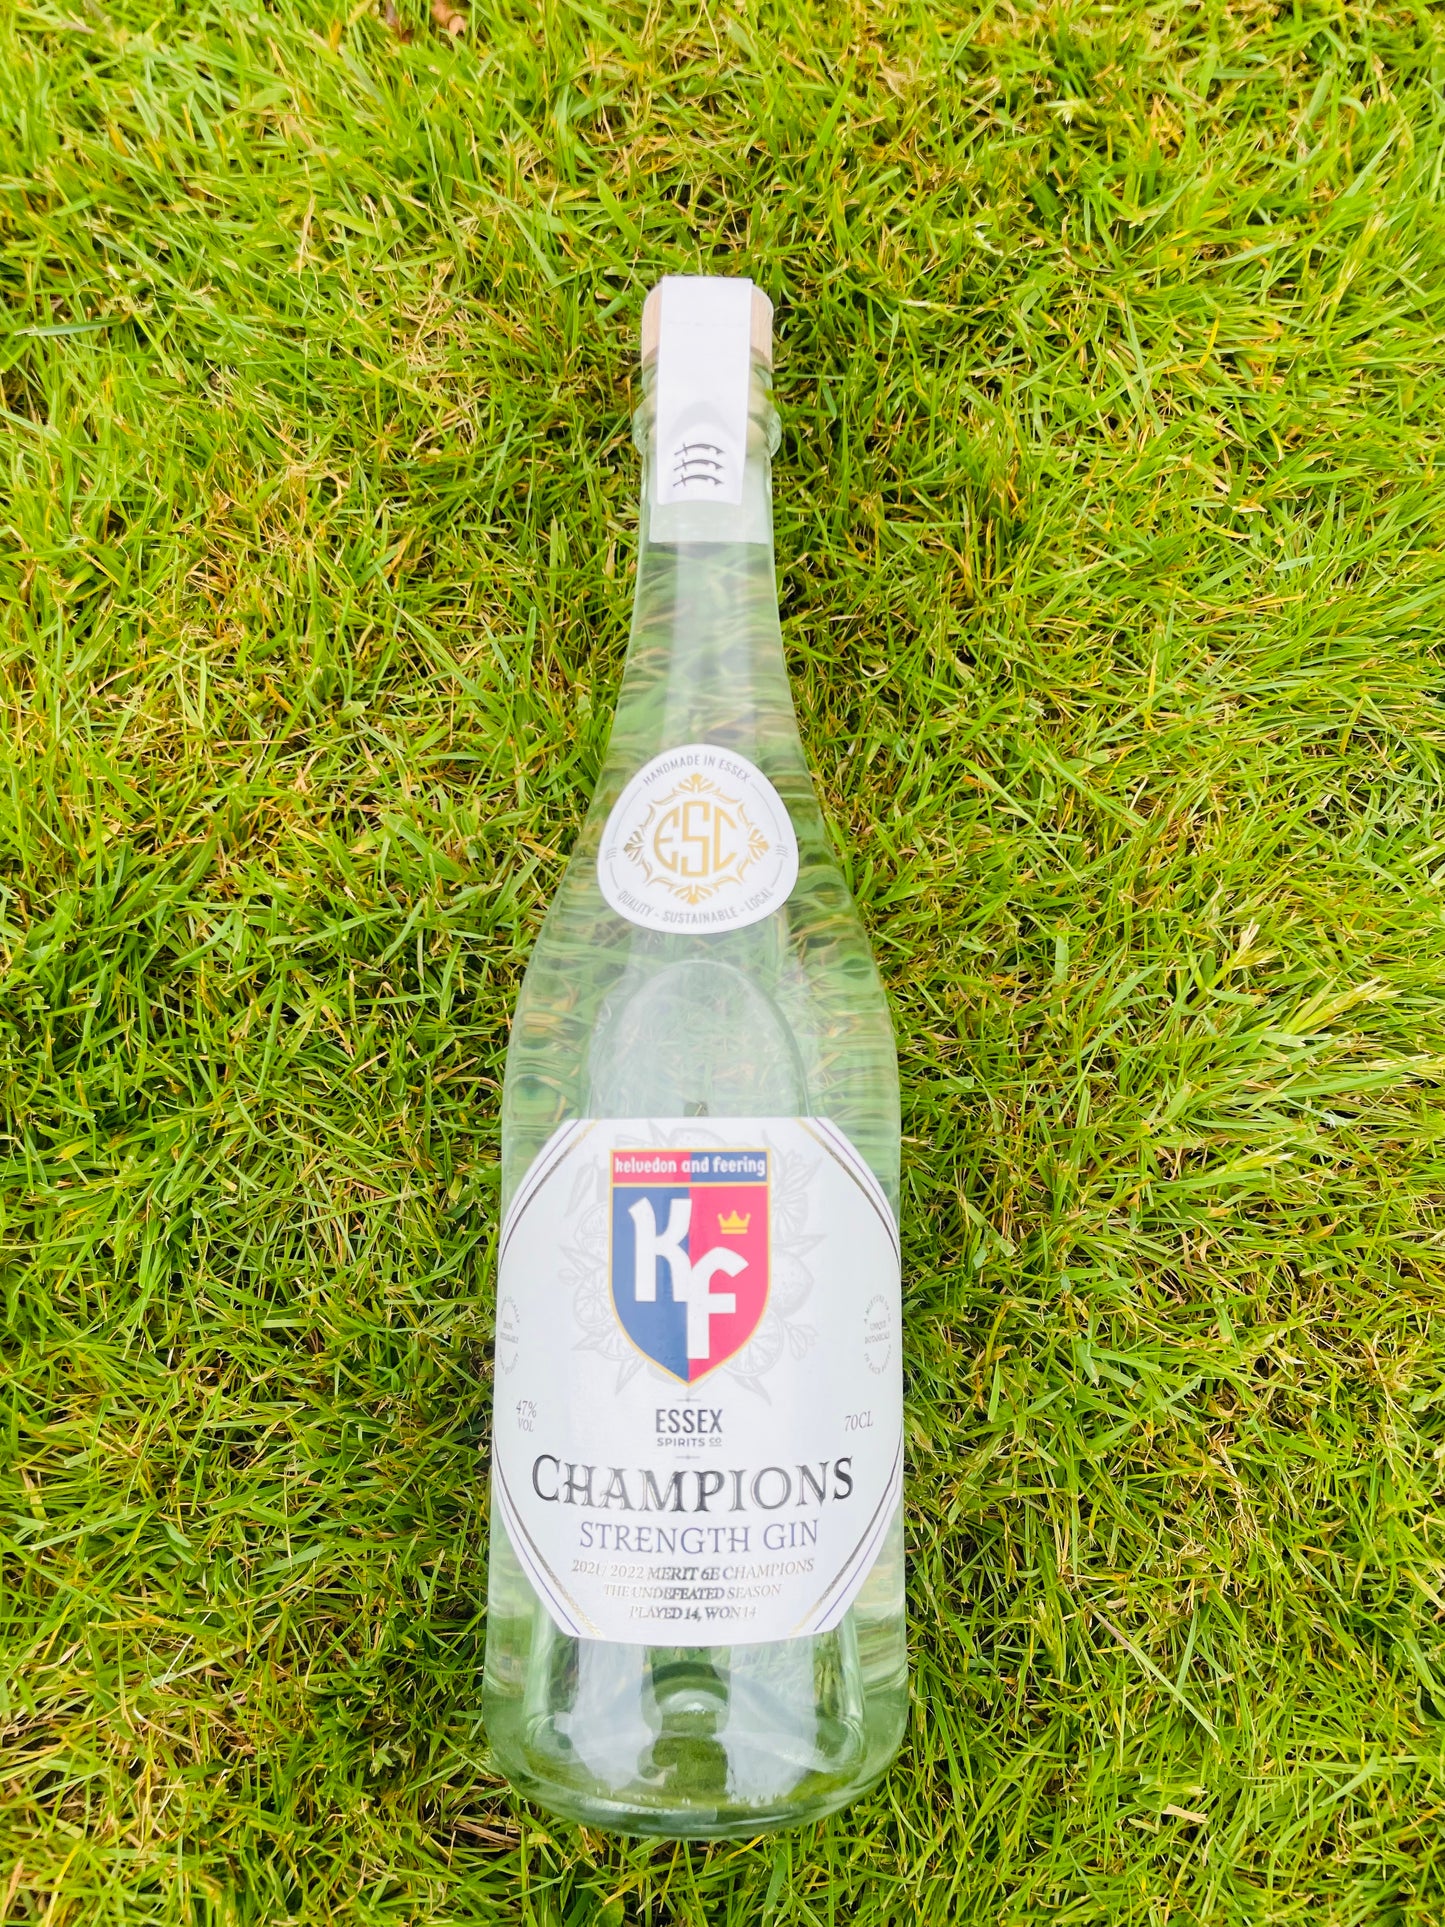 KFRUFC CHAMPIONS STRENGTH GIN available at Essex Spirits Co. online shop and The Essex Distillery, Chelmsford